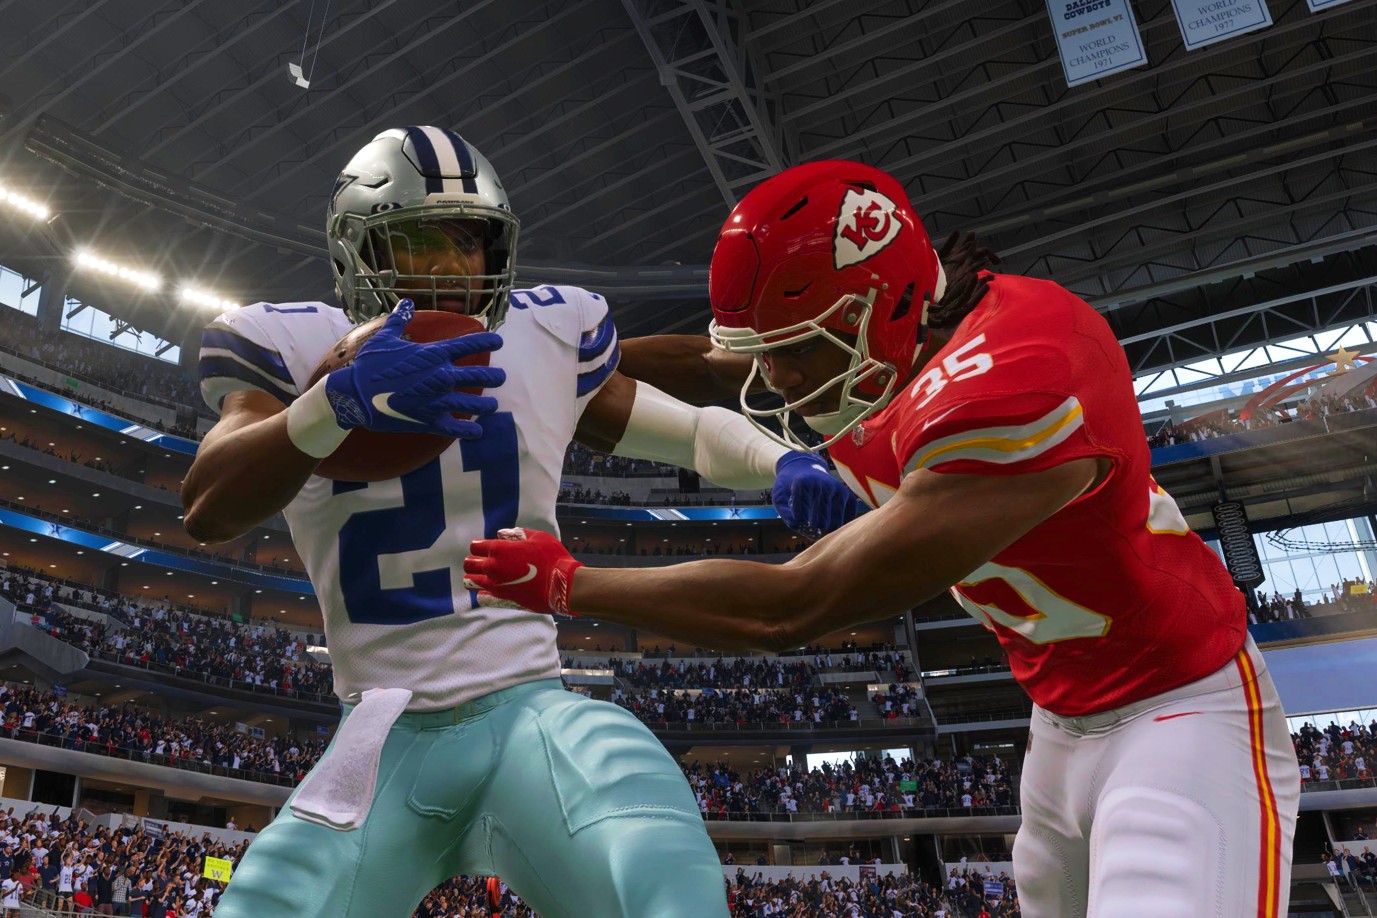 Madden 22 Franchise Mode: Building a Dynasty